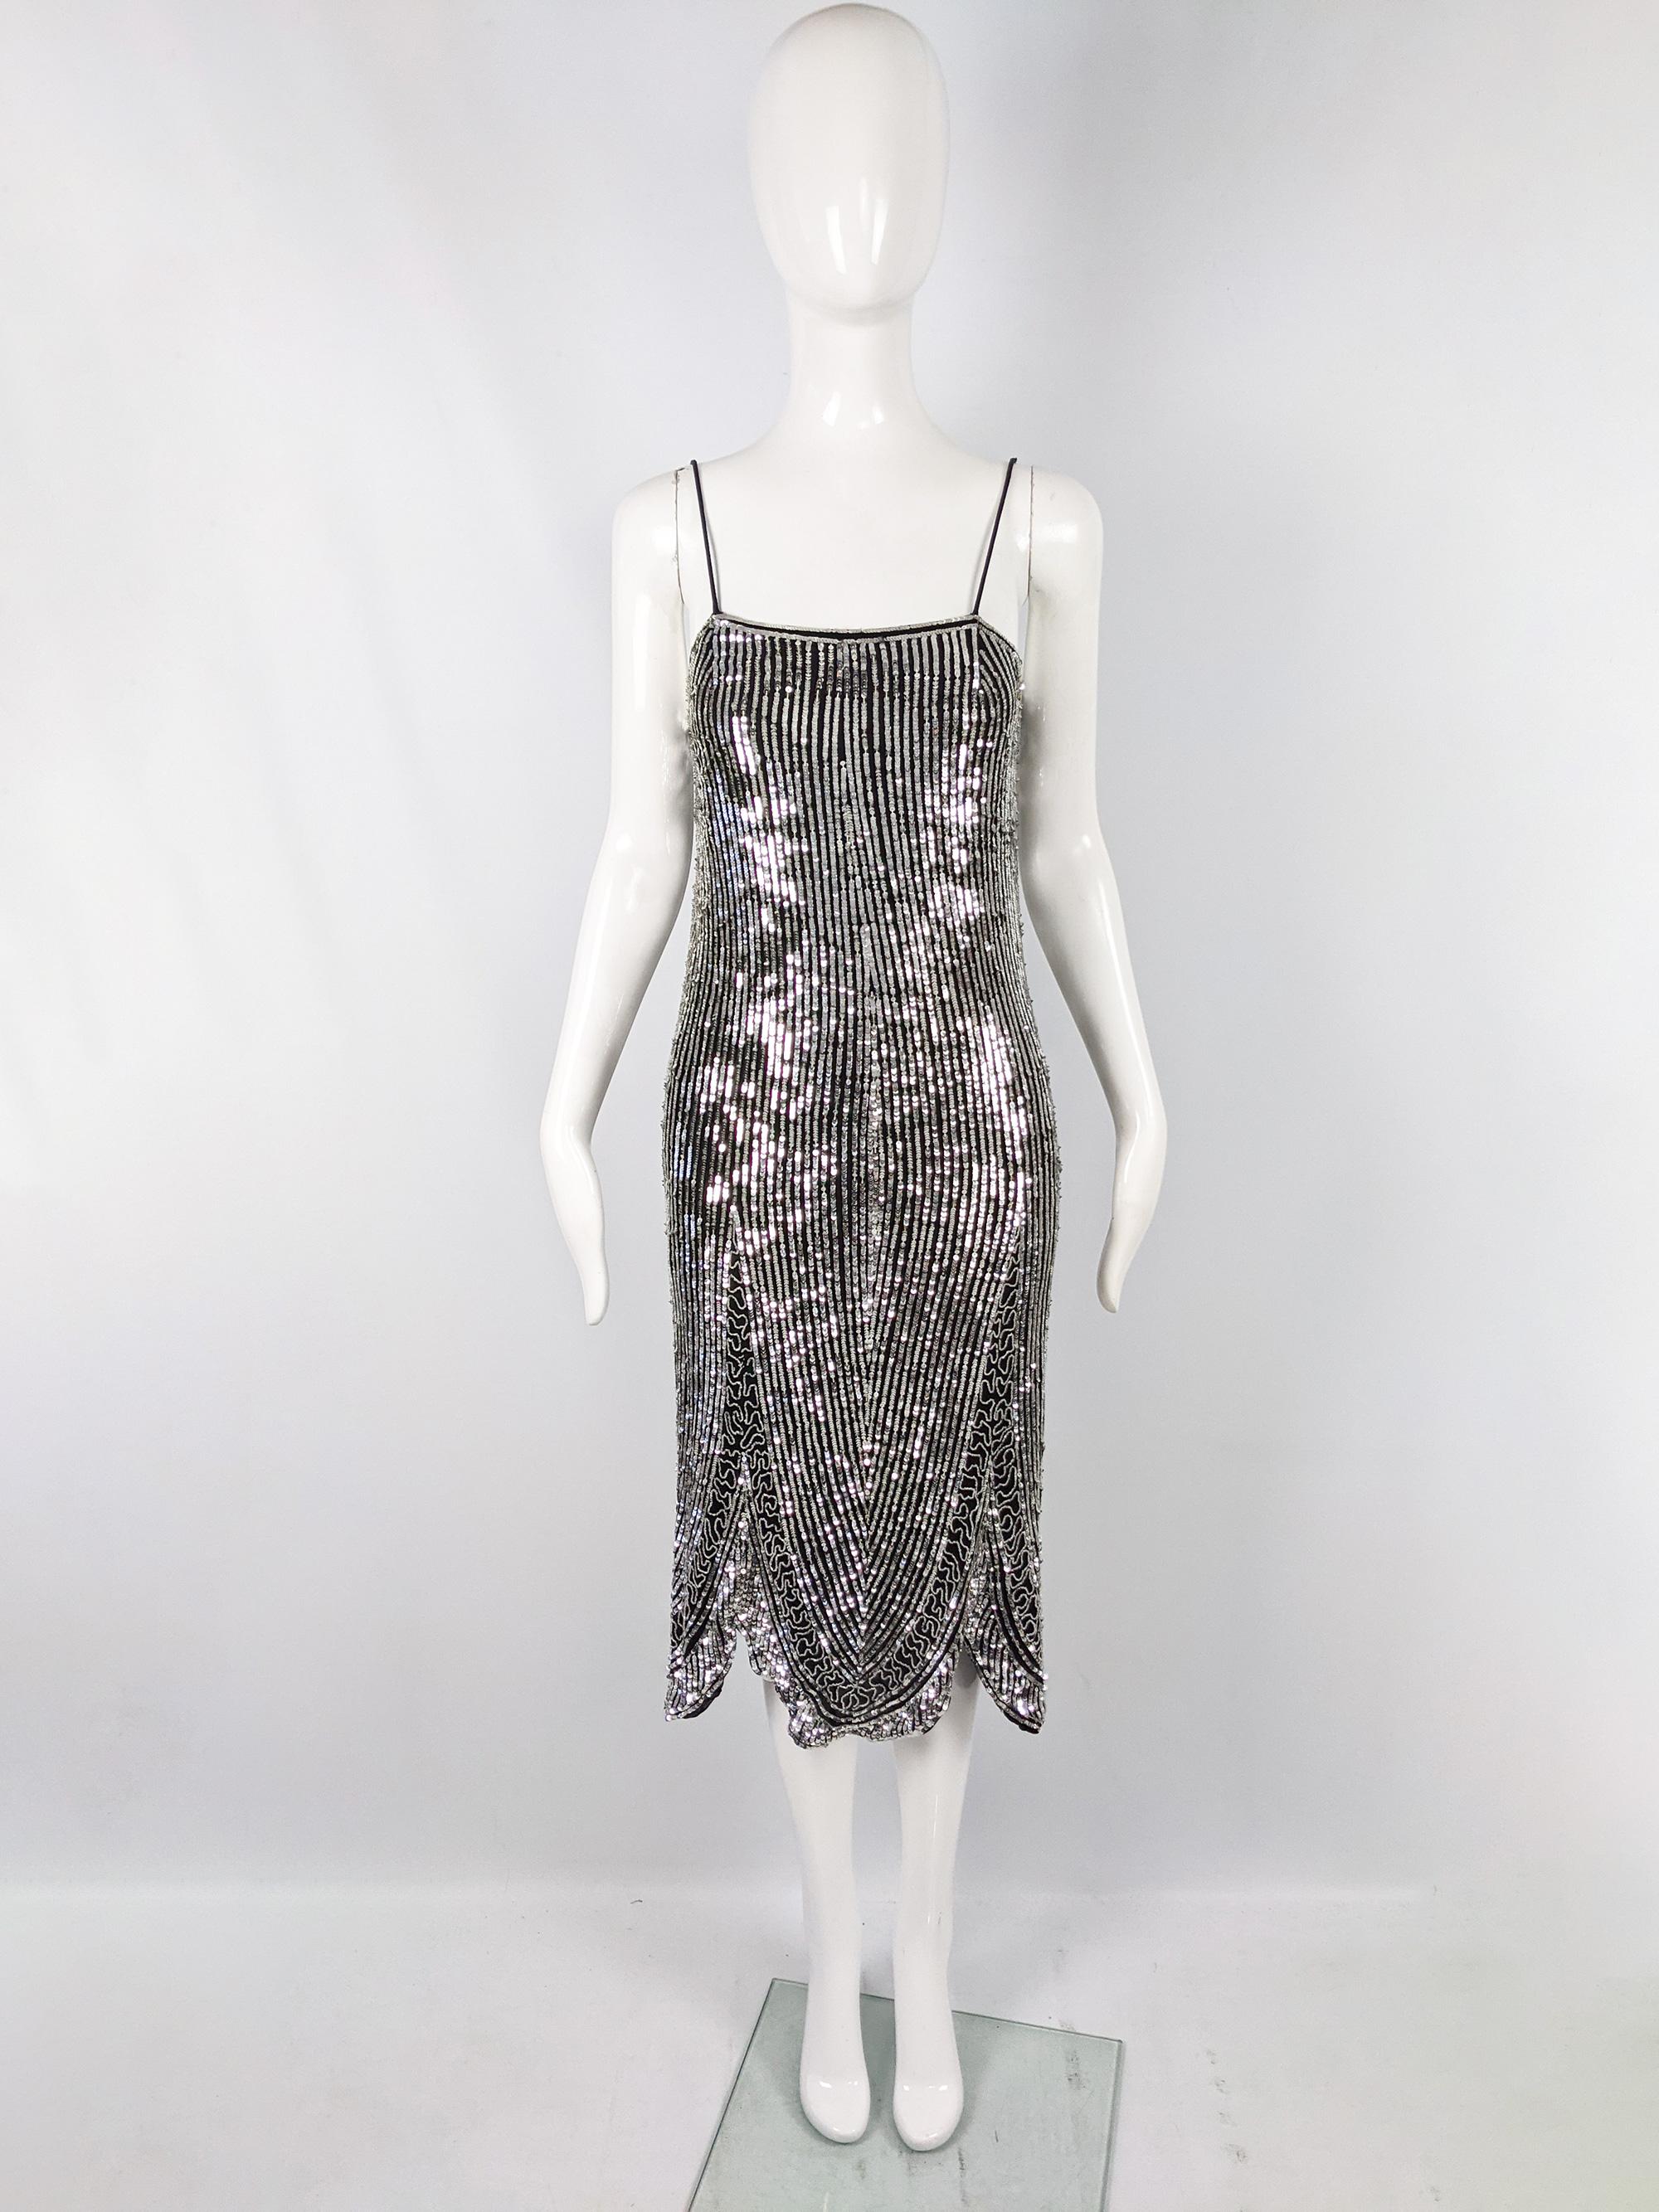 A chic vintage womens party dress from the 80s in a 1920s flapper style by luxury British fashion house, Eavis & Brown, known for their opulent, heavily embellished evening wear. This is in a black pure silk covered in silver sequins and glass beads